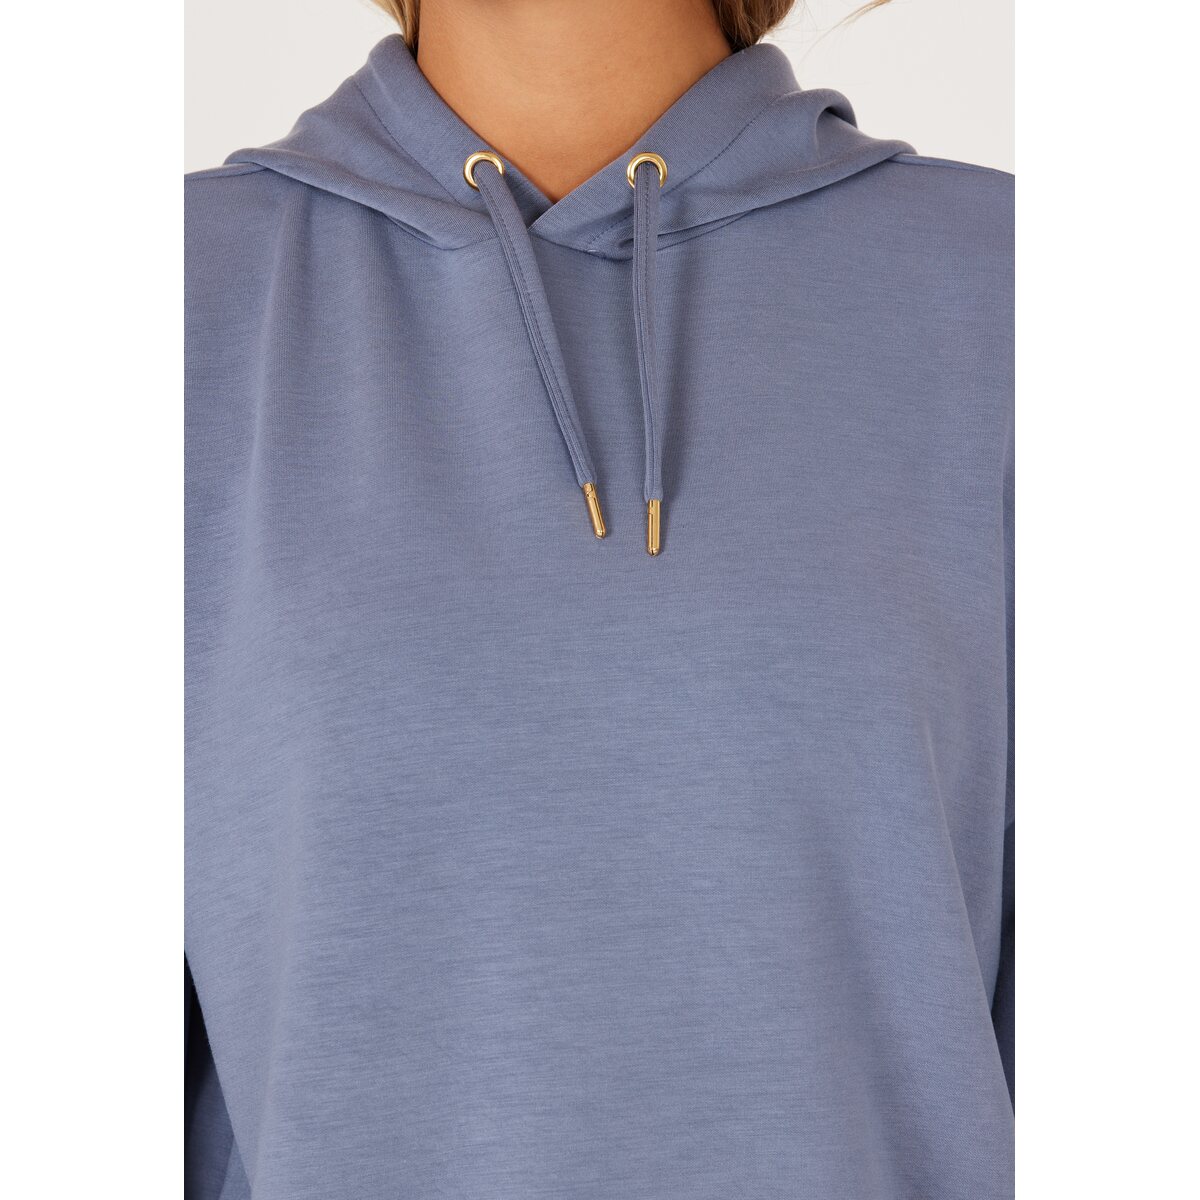 Hanorace & Pulovere -  athlecia Namier W Hoodie 